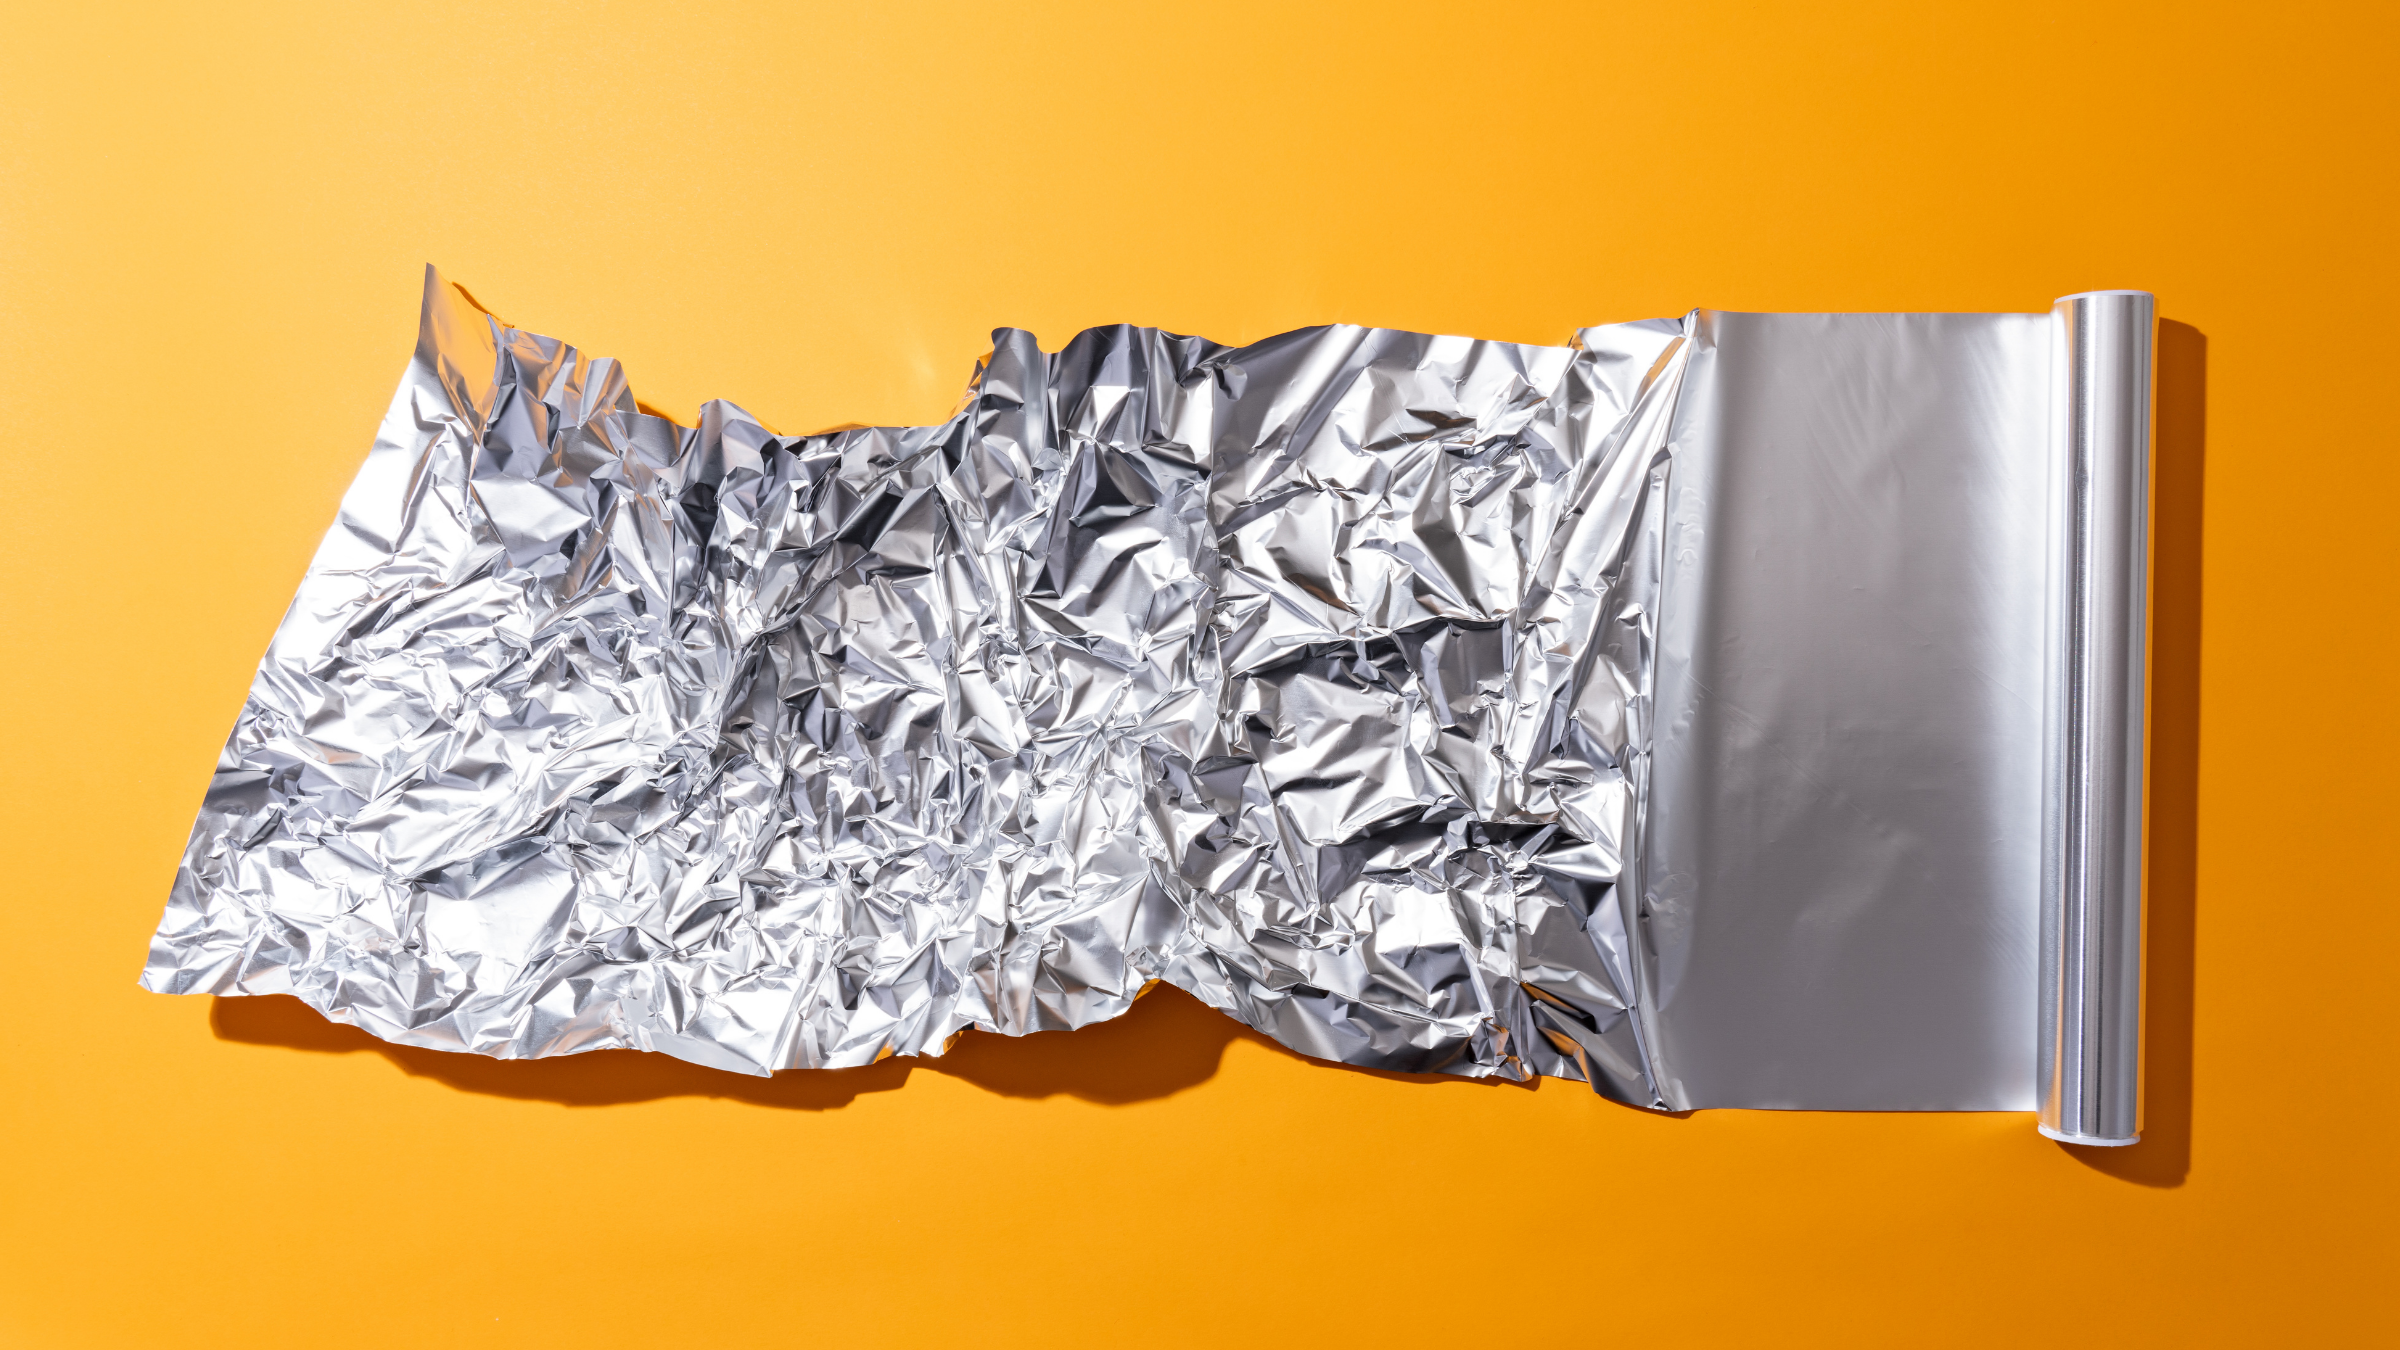 Is Aluminum Foil Toxic When Cooking? Food-Safety Experts Explain